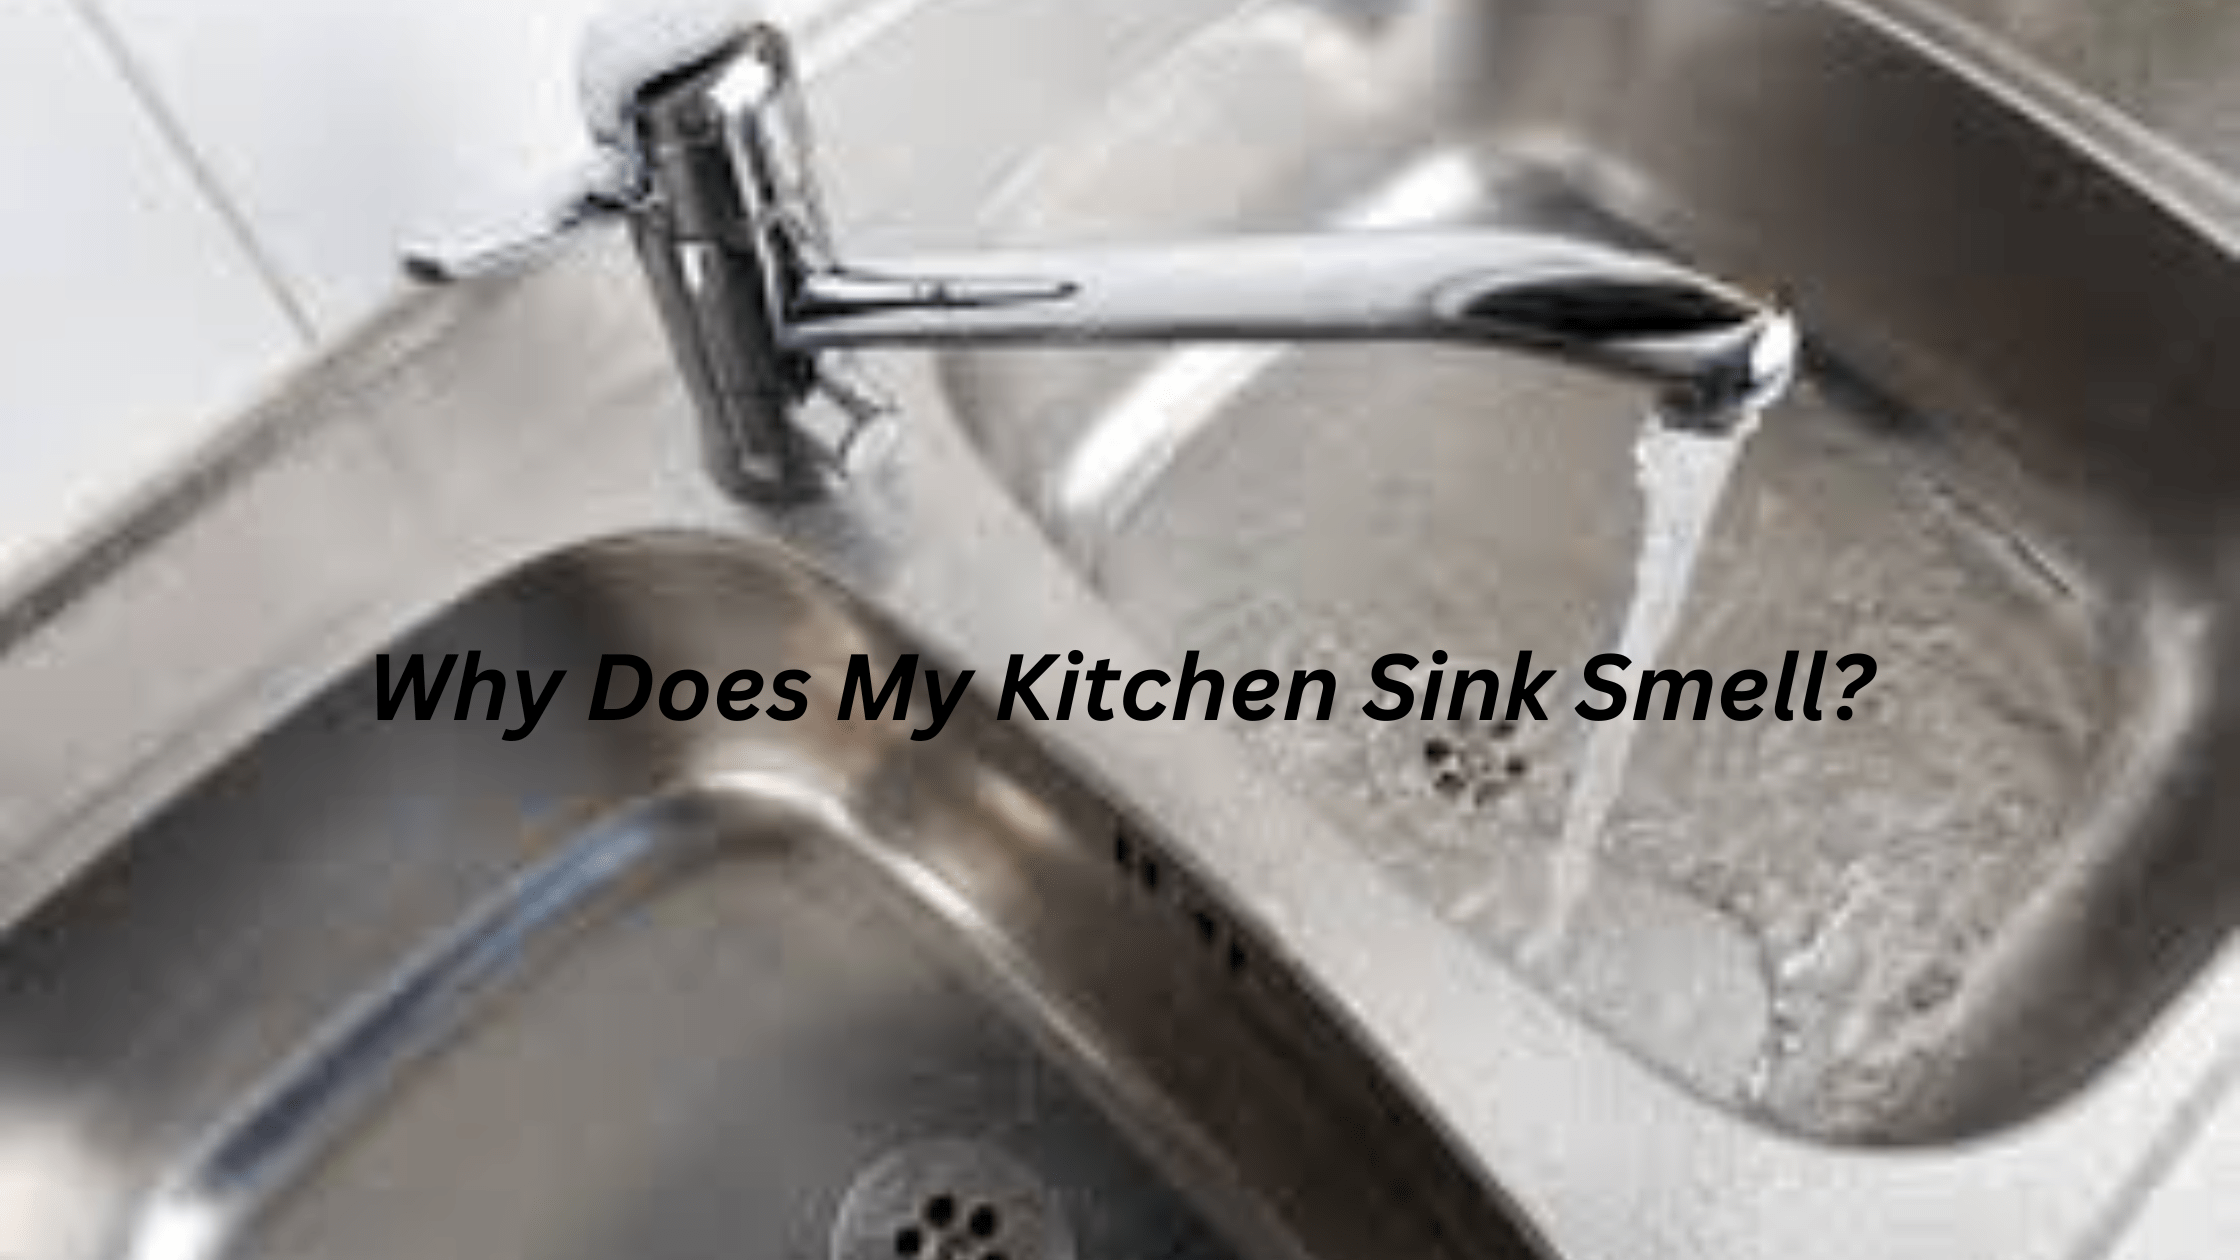 Why Does My Kitchen Sink Smell?